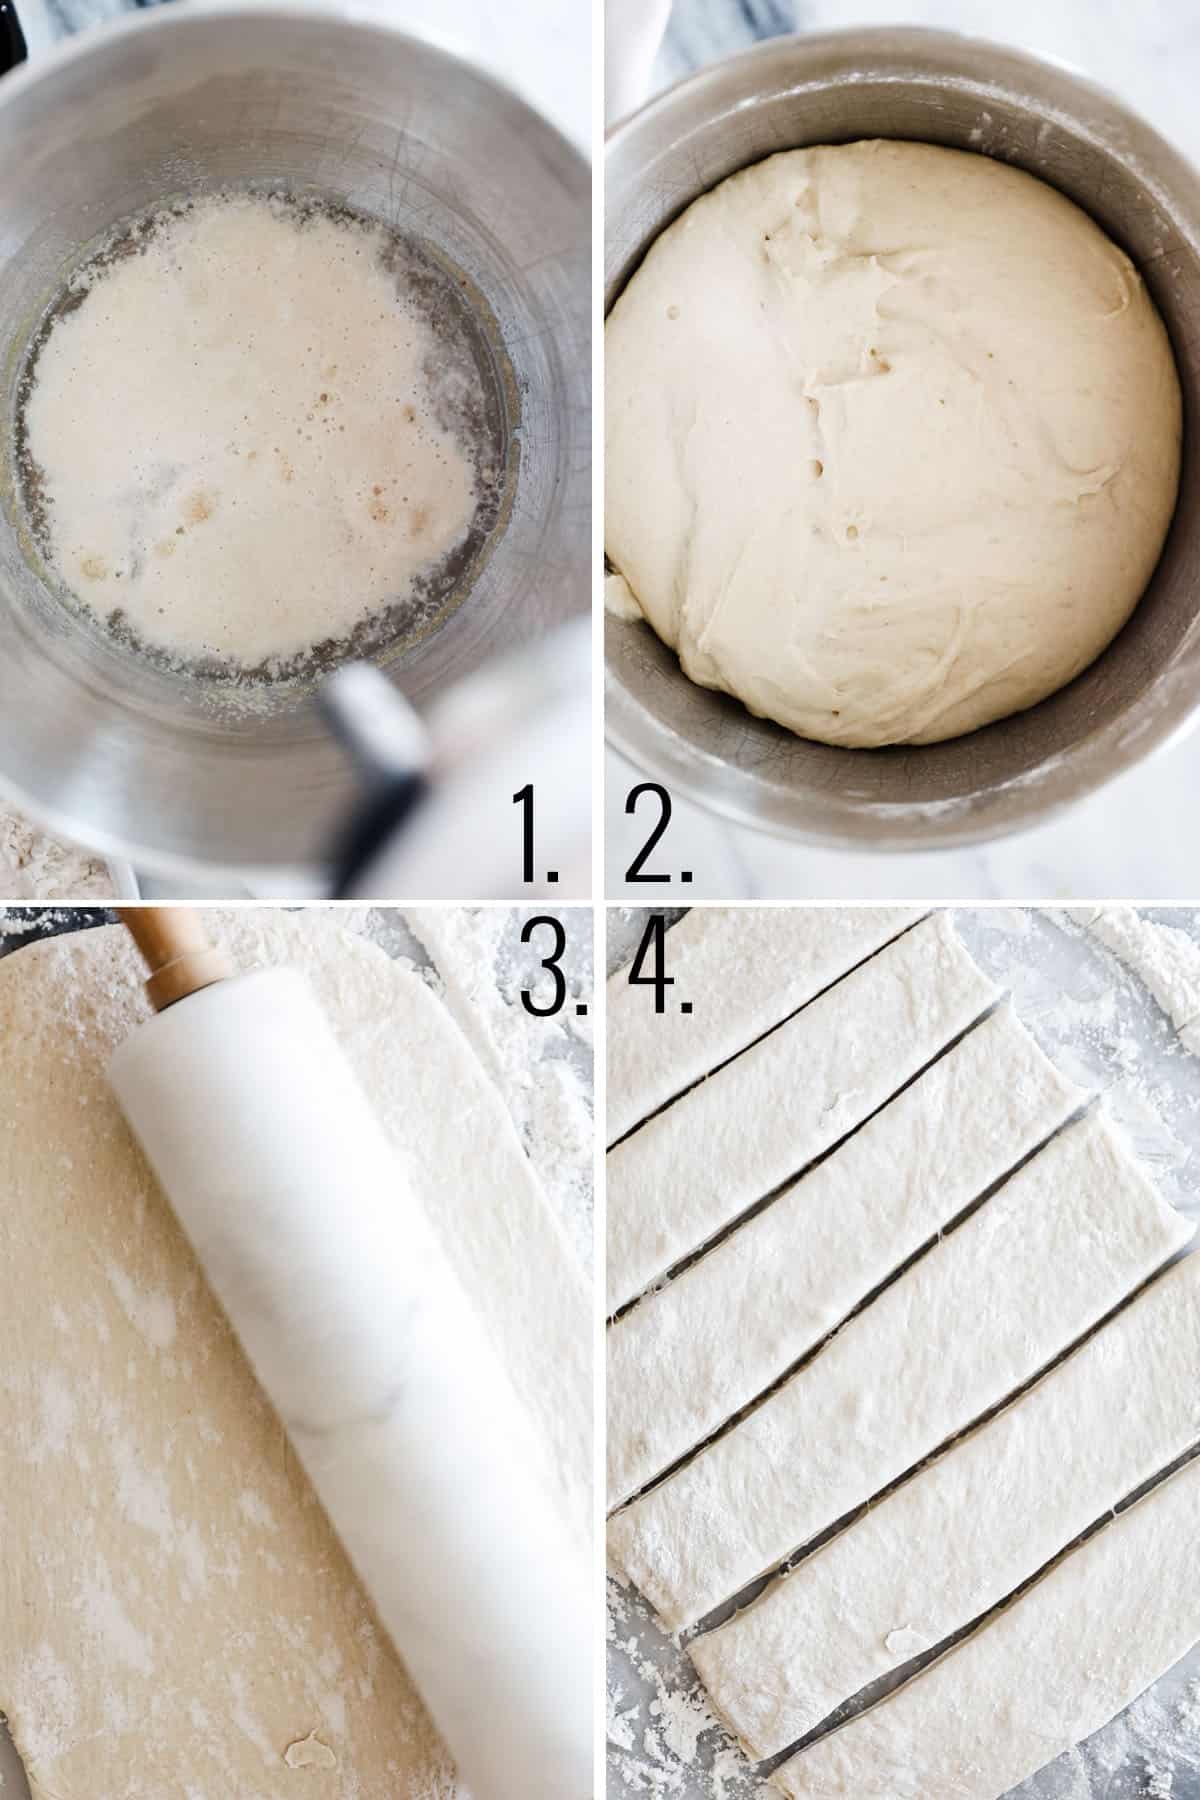 Four photos showing adding ingredients to mixing bowl, rolling out dough and cutting.